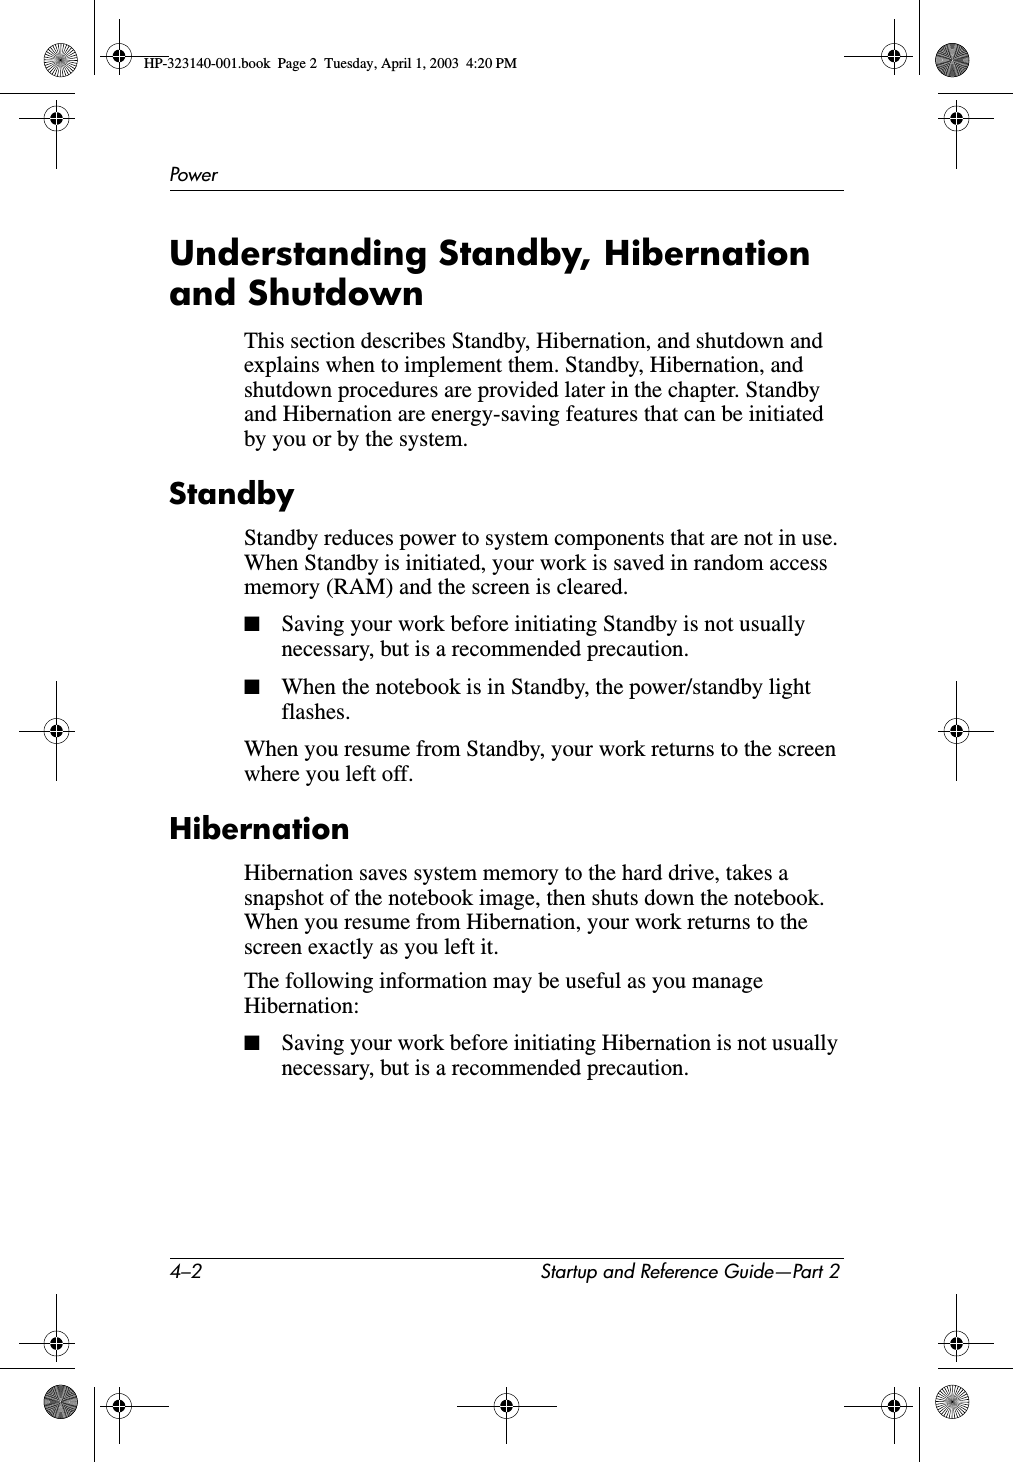 4–2 Startup and Reference Guide—Part 2PowerUnderstanding Standby, Hibernation and ShutdownThis section describes Standby, Hibernation, and shutdown and explains when to implement them. Standby, Hibernation, and shutdown procedures are provided later in the chapter. Standby and Hibernation are energy-saving features that can be initiated by you or by the system. StandbyStandby reduces power to system components that are not in use. When Standby is initiated, your work is saved in random access memory (RAM) and the screen is cleared. ■Saving your work before initiating Standby is not usually necessary, but is a recommended precaution.■When the notebook is in Standby, the power/standby light flashes.When you resume from Standby, your work returns to the screen where you left off.HibernationHibernation saves system memory to the hard drive, takes a snapshot of the notebook image, then shuts down the notebook. When you resume from Hibernation, your work returns to the screen exactly as you left it. The following information may be useful as you manage Hibernation:■Saving your work before initiating Hibernation is not usually necessary, but is a recommended precaution.HP-323140-001.book  Page 2  Tuesday, April 1, 2003  4:20 PM